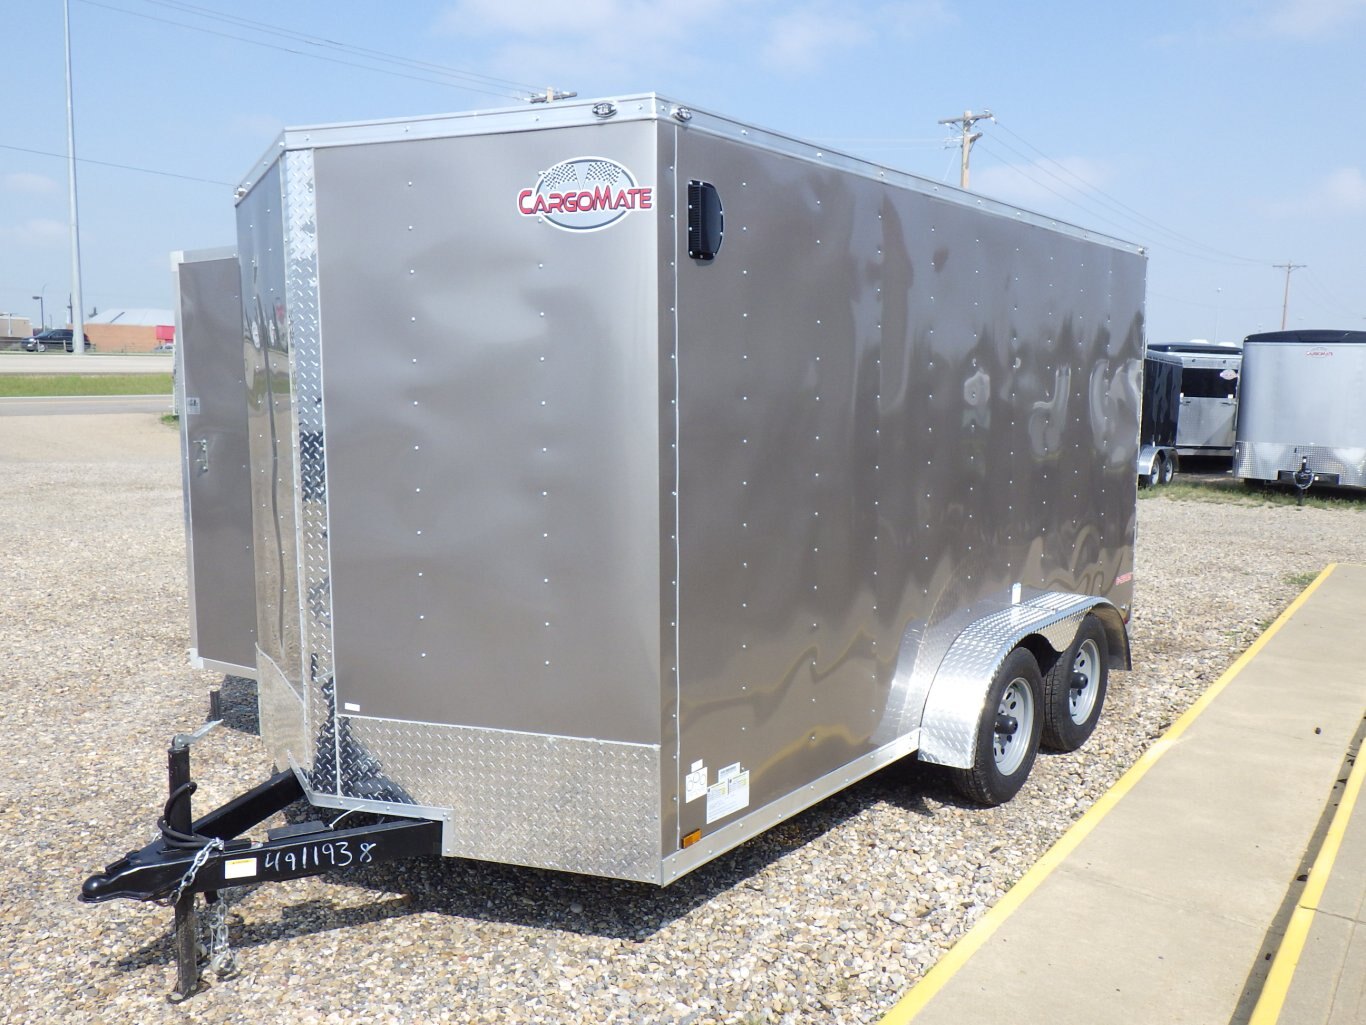 2023 CARGO MATE E SERIES 7 X 14 WEDGE FRONT TRAILER #491193 MODEL YEAR 2023 BLOWOUT SALE